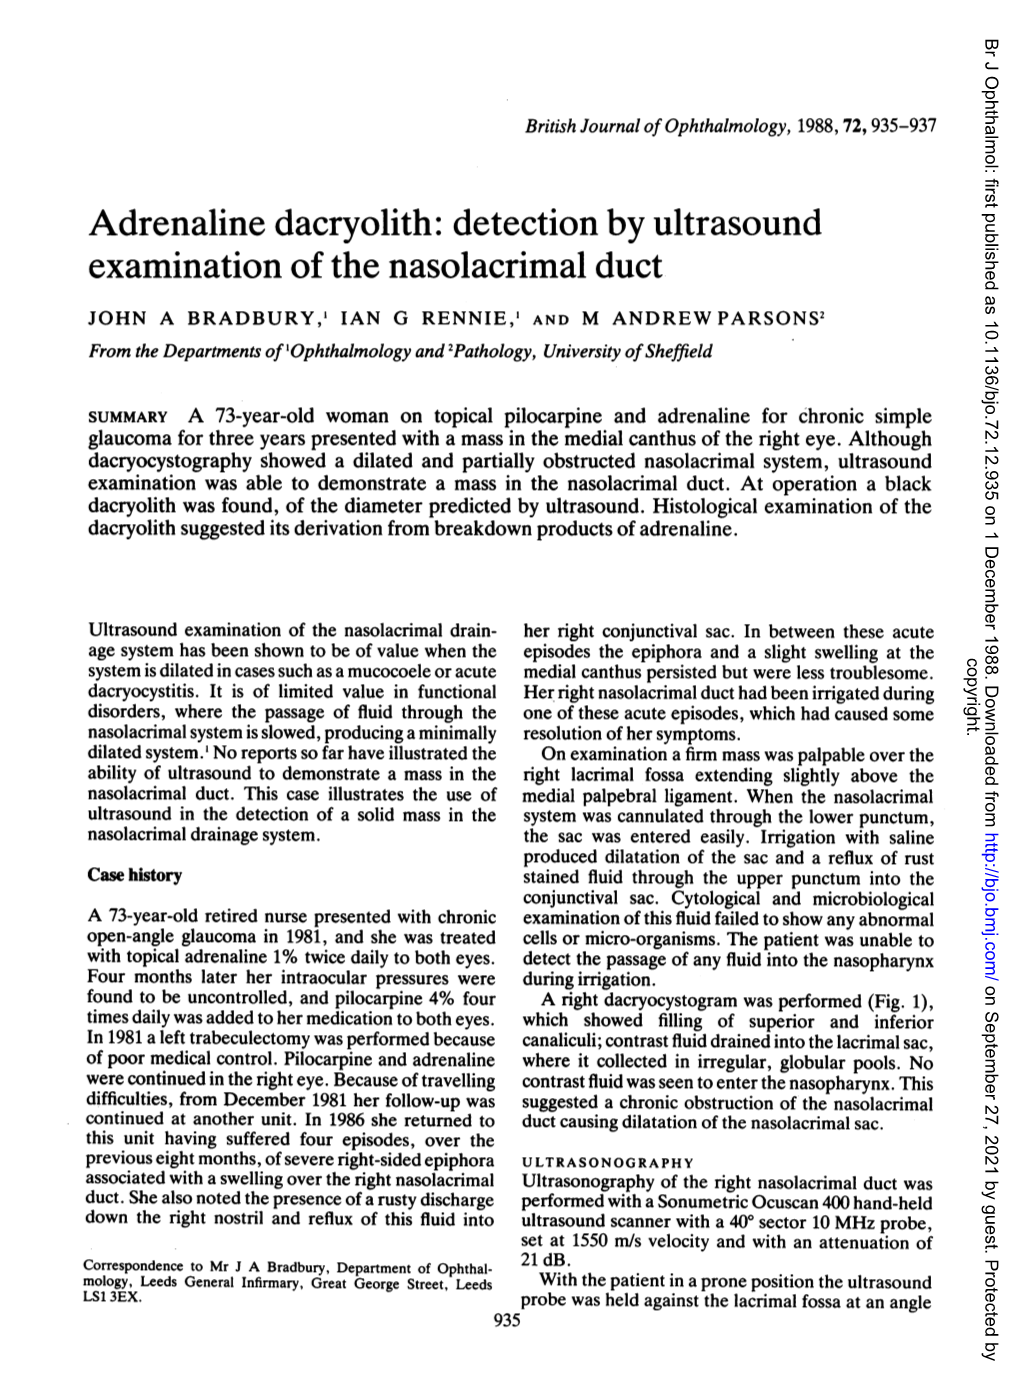 Adrenaline Dacryolith: Detection by Ultrasound Examination of the Nasolacrimal Duct